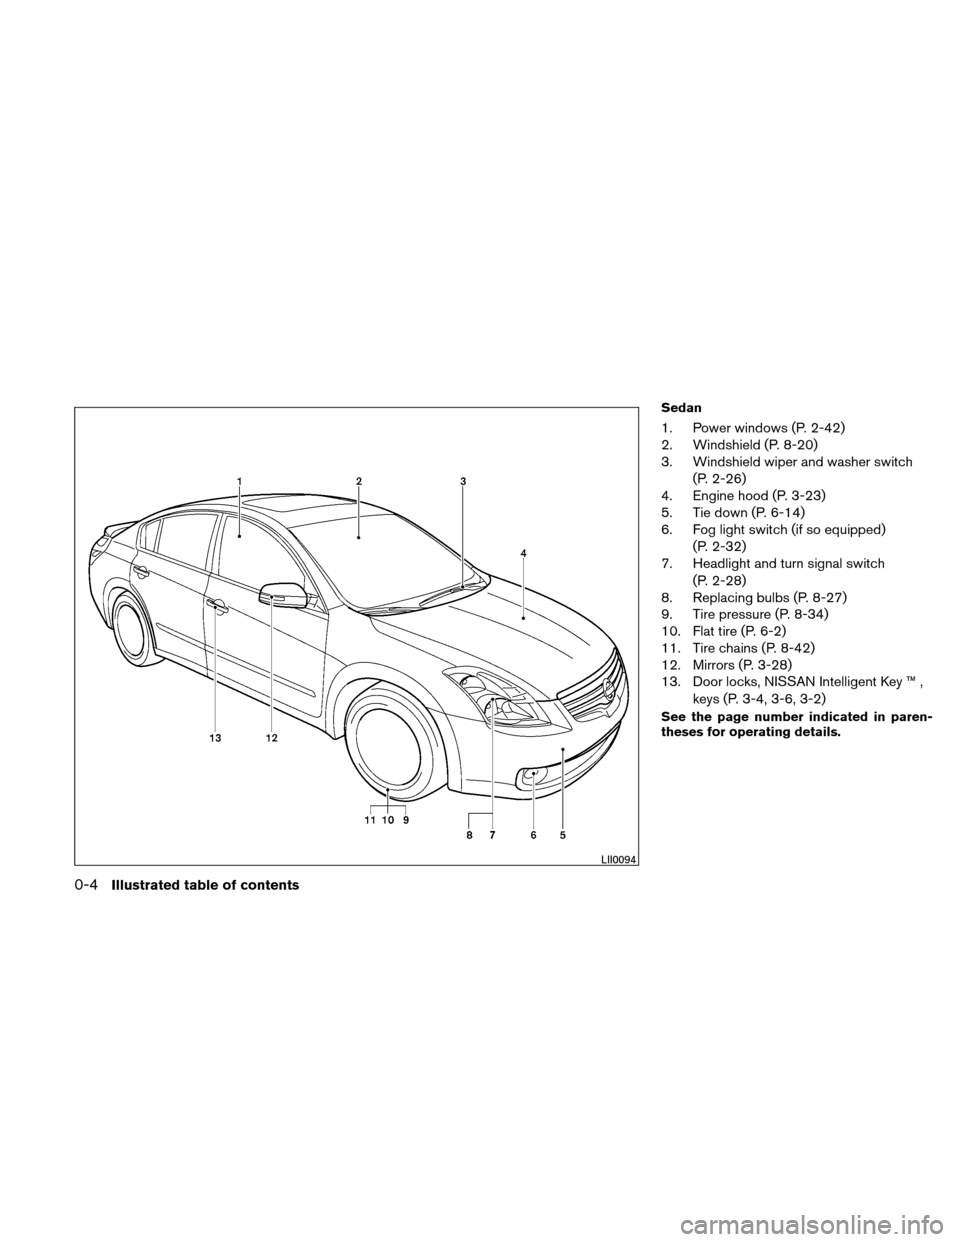 NISSAN ALTIMA COUPE 2010 D32 / 4.G User Guide Sedan
1. Power windows (P. 2-42)
2. Windshield (P. 8-20)
3. Windshield wiper and washer switch(P. 2-26)
4. Engine hood (P. 3-23)
5. Tie down (P. 6-14)
6. Fog light switch (if so equipped)
(P. 2-32)
7.